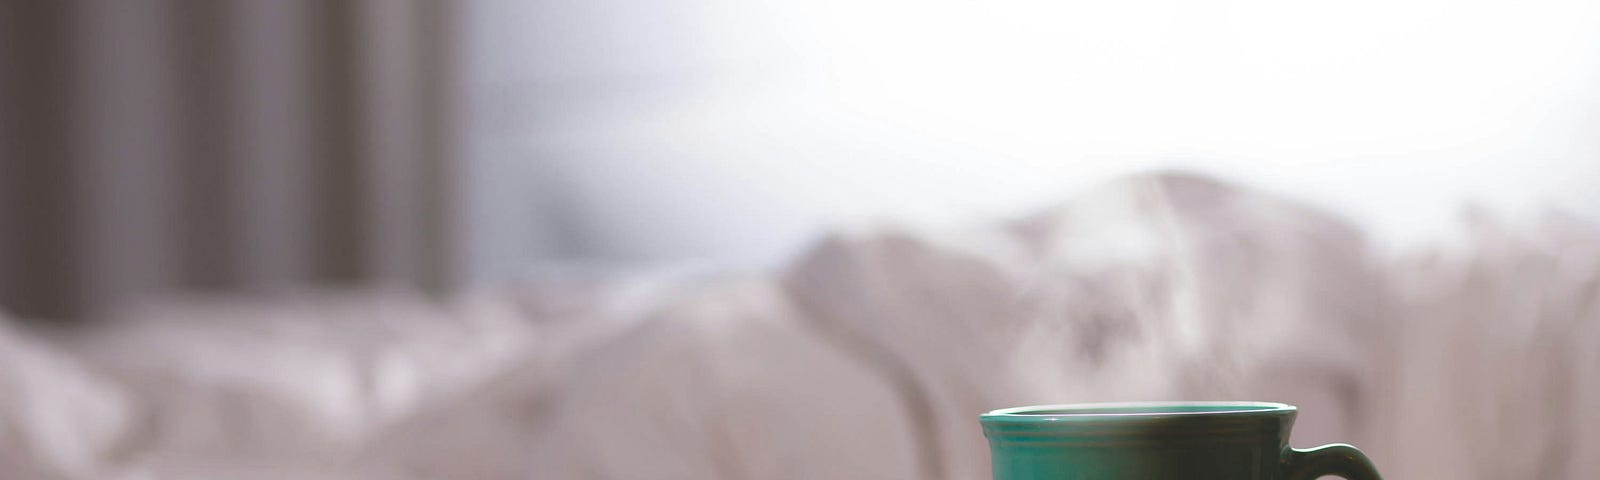 A steaming green coffee cup in the foreground. A sleeping figure, wrapped in a white comforter in the background.